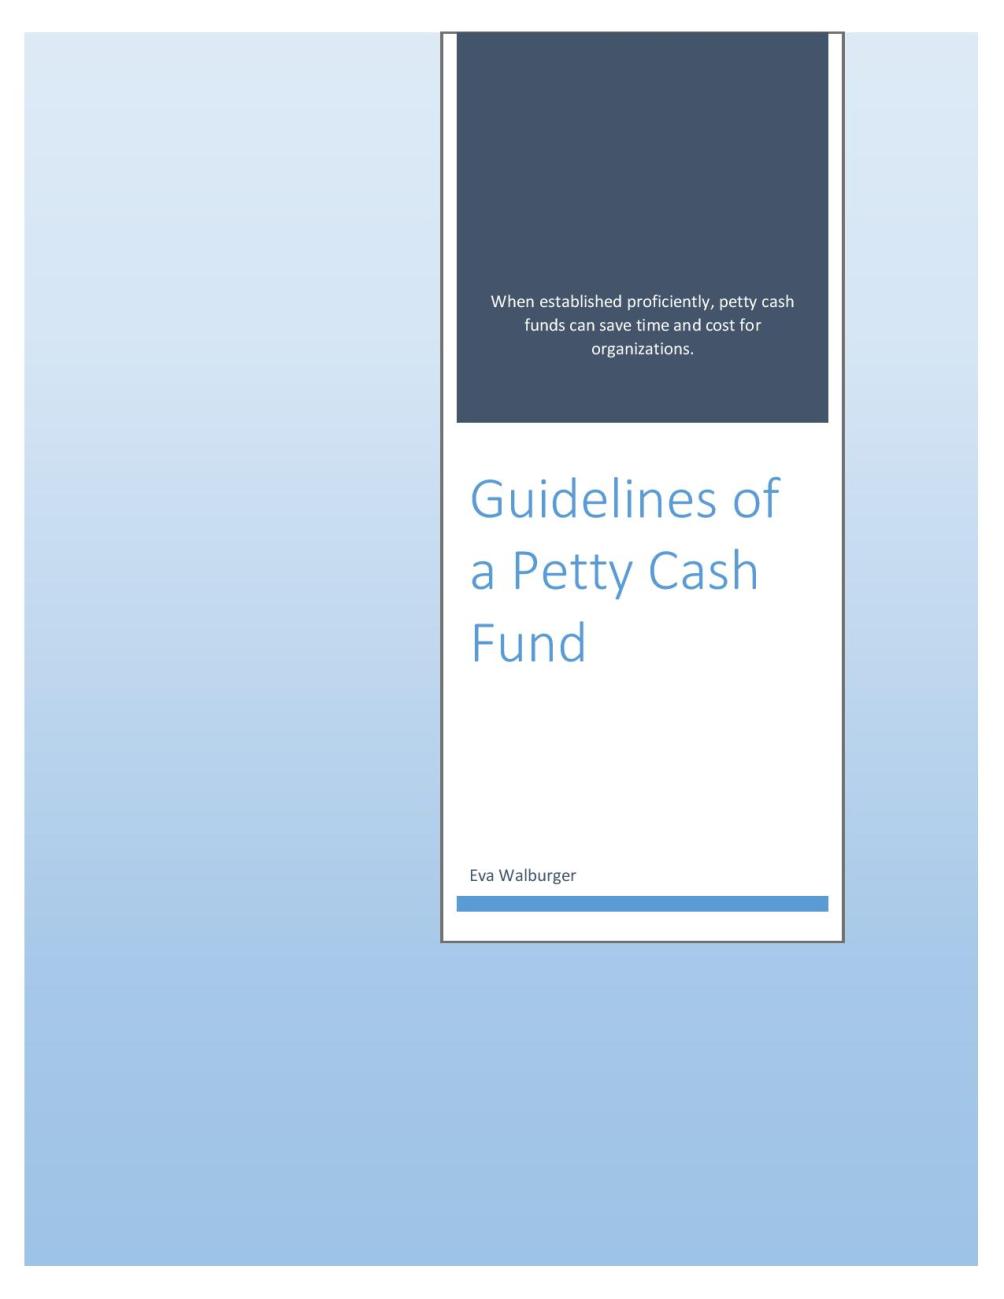 Guidelines for Petty Cash Fund-page-001